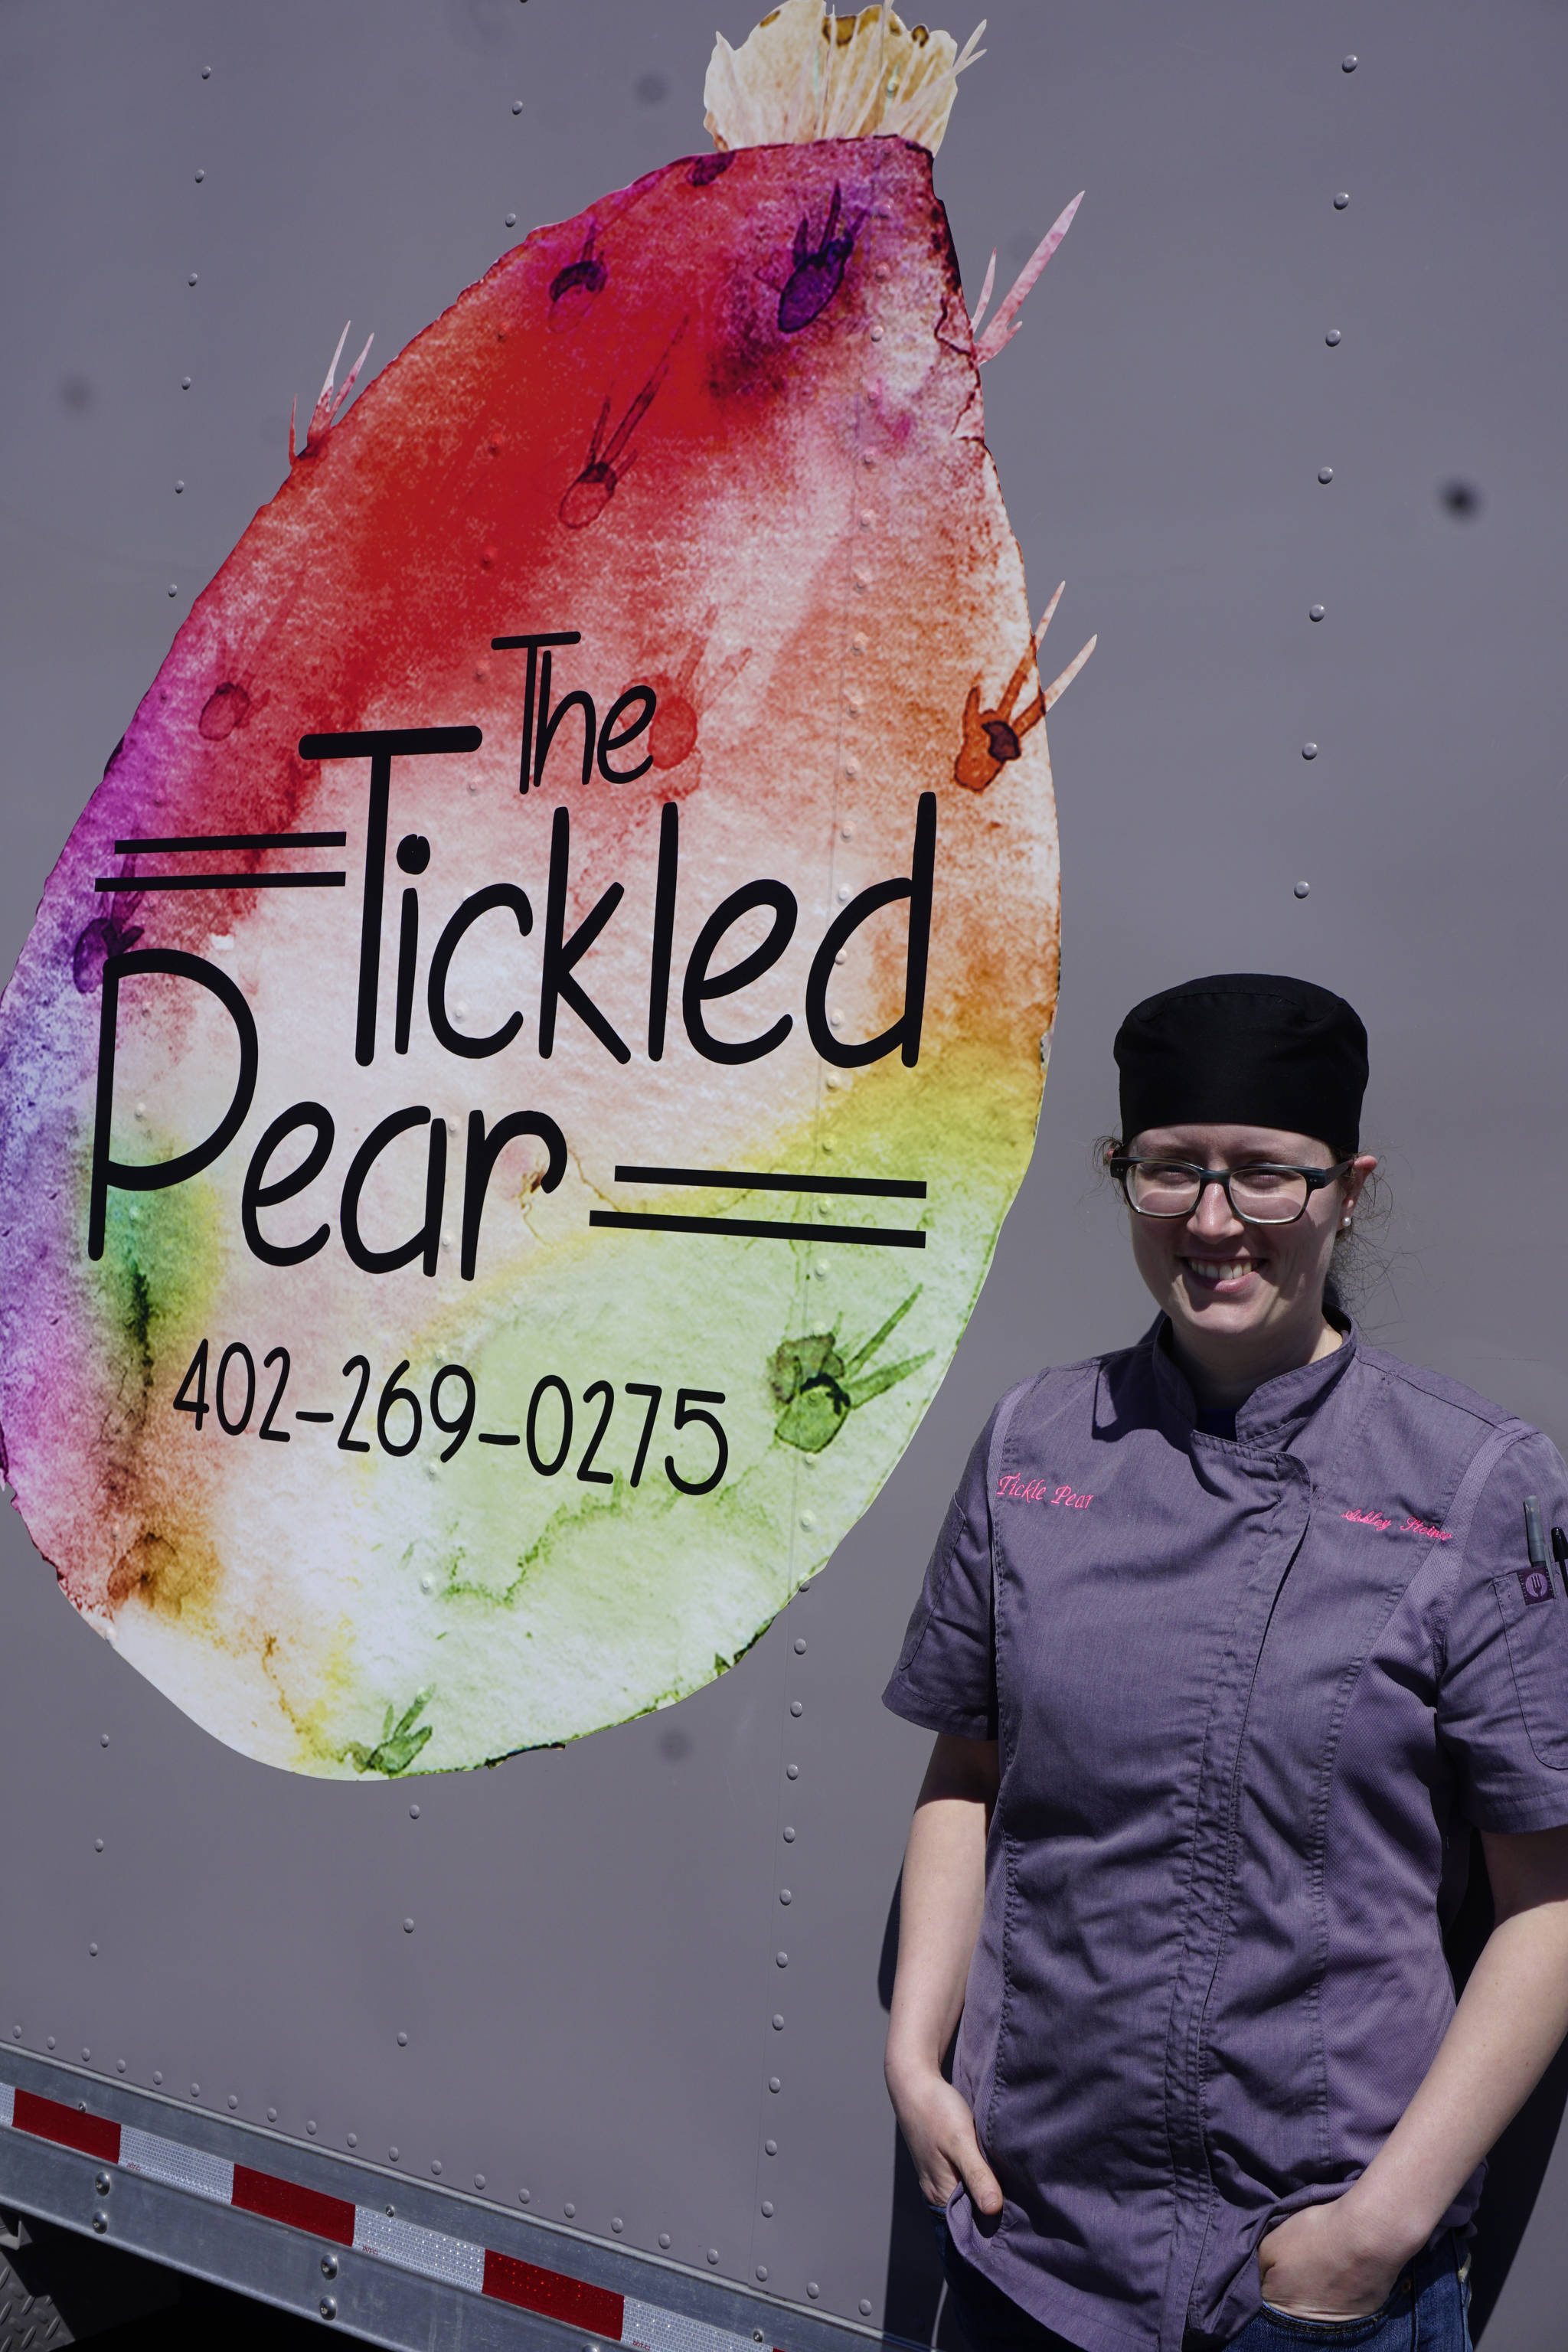 Ashley Steiner stands by her food trailer, The Tickled Pear, on Friday, June 1, 2018, at its spot near Coal Point Seafoods on the Homer Spit. (Photo by Michael Armstrong/Homer News)